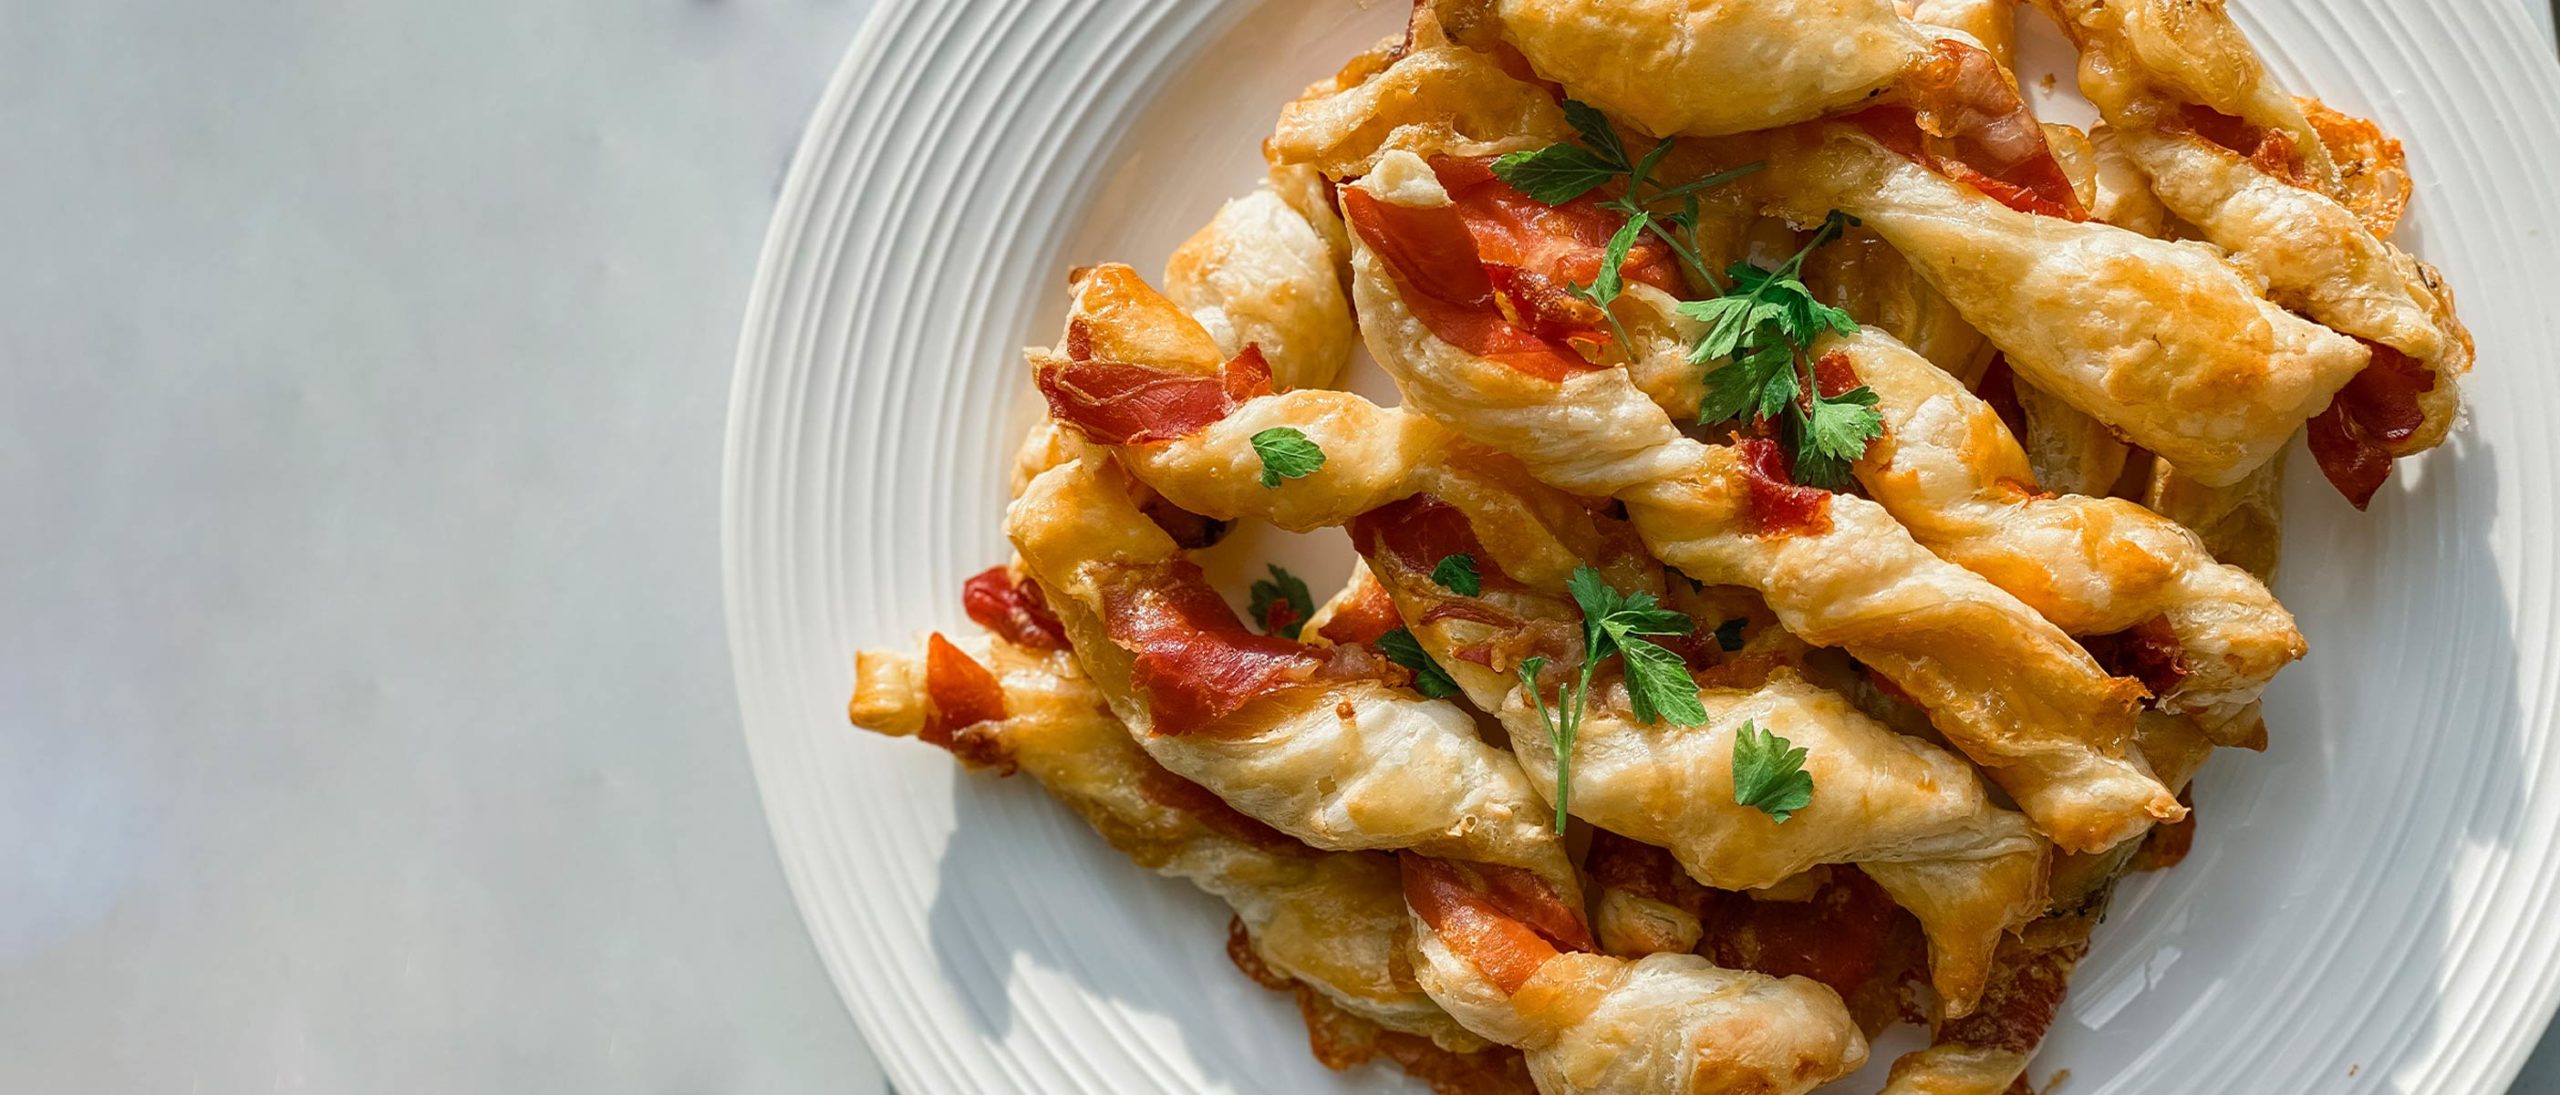 Cooking With Adriana: Prosciutto and Brie Puff Pastry Twists